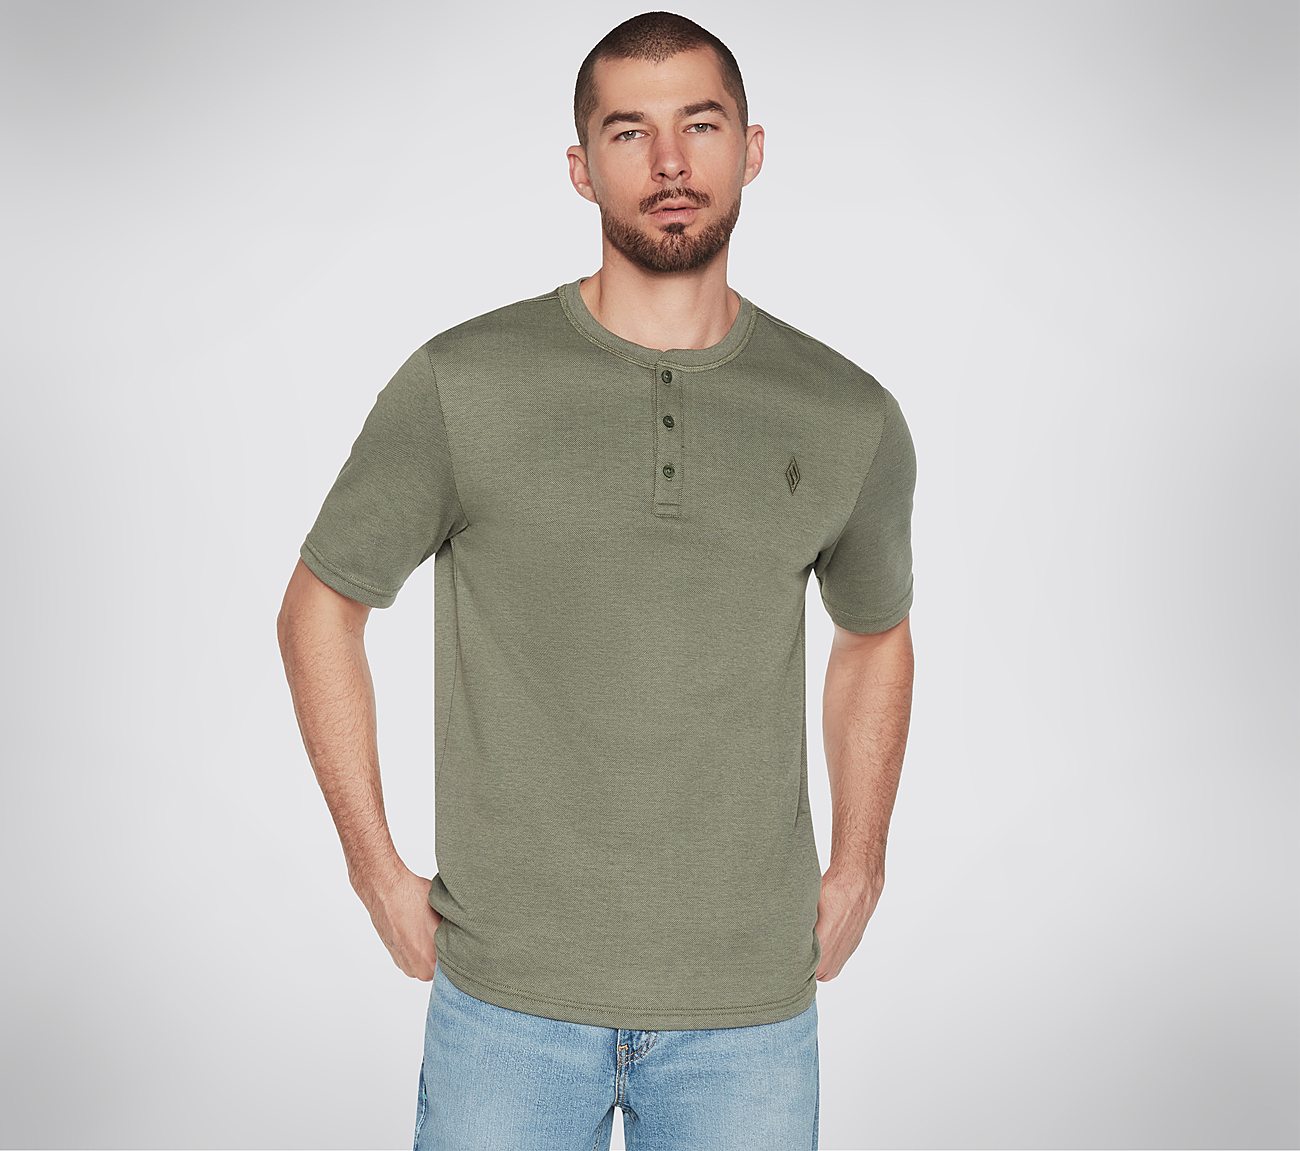 GOKNIT PIQUE S/S HENLEY, LIGHT GREY/GREEN Apparels Lateral View